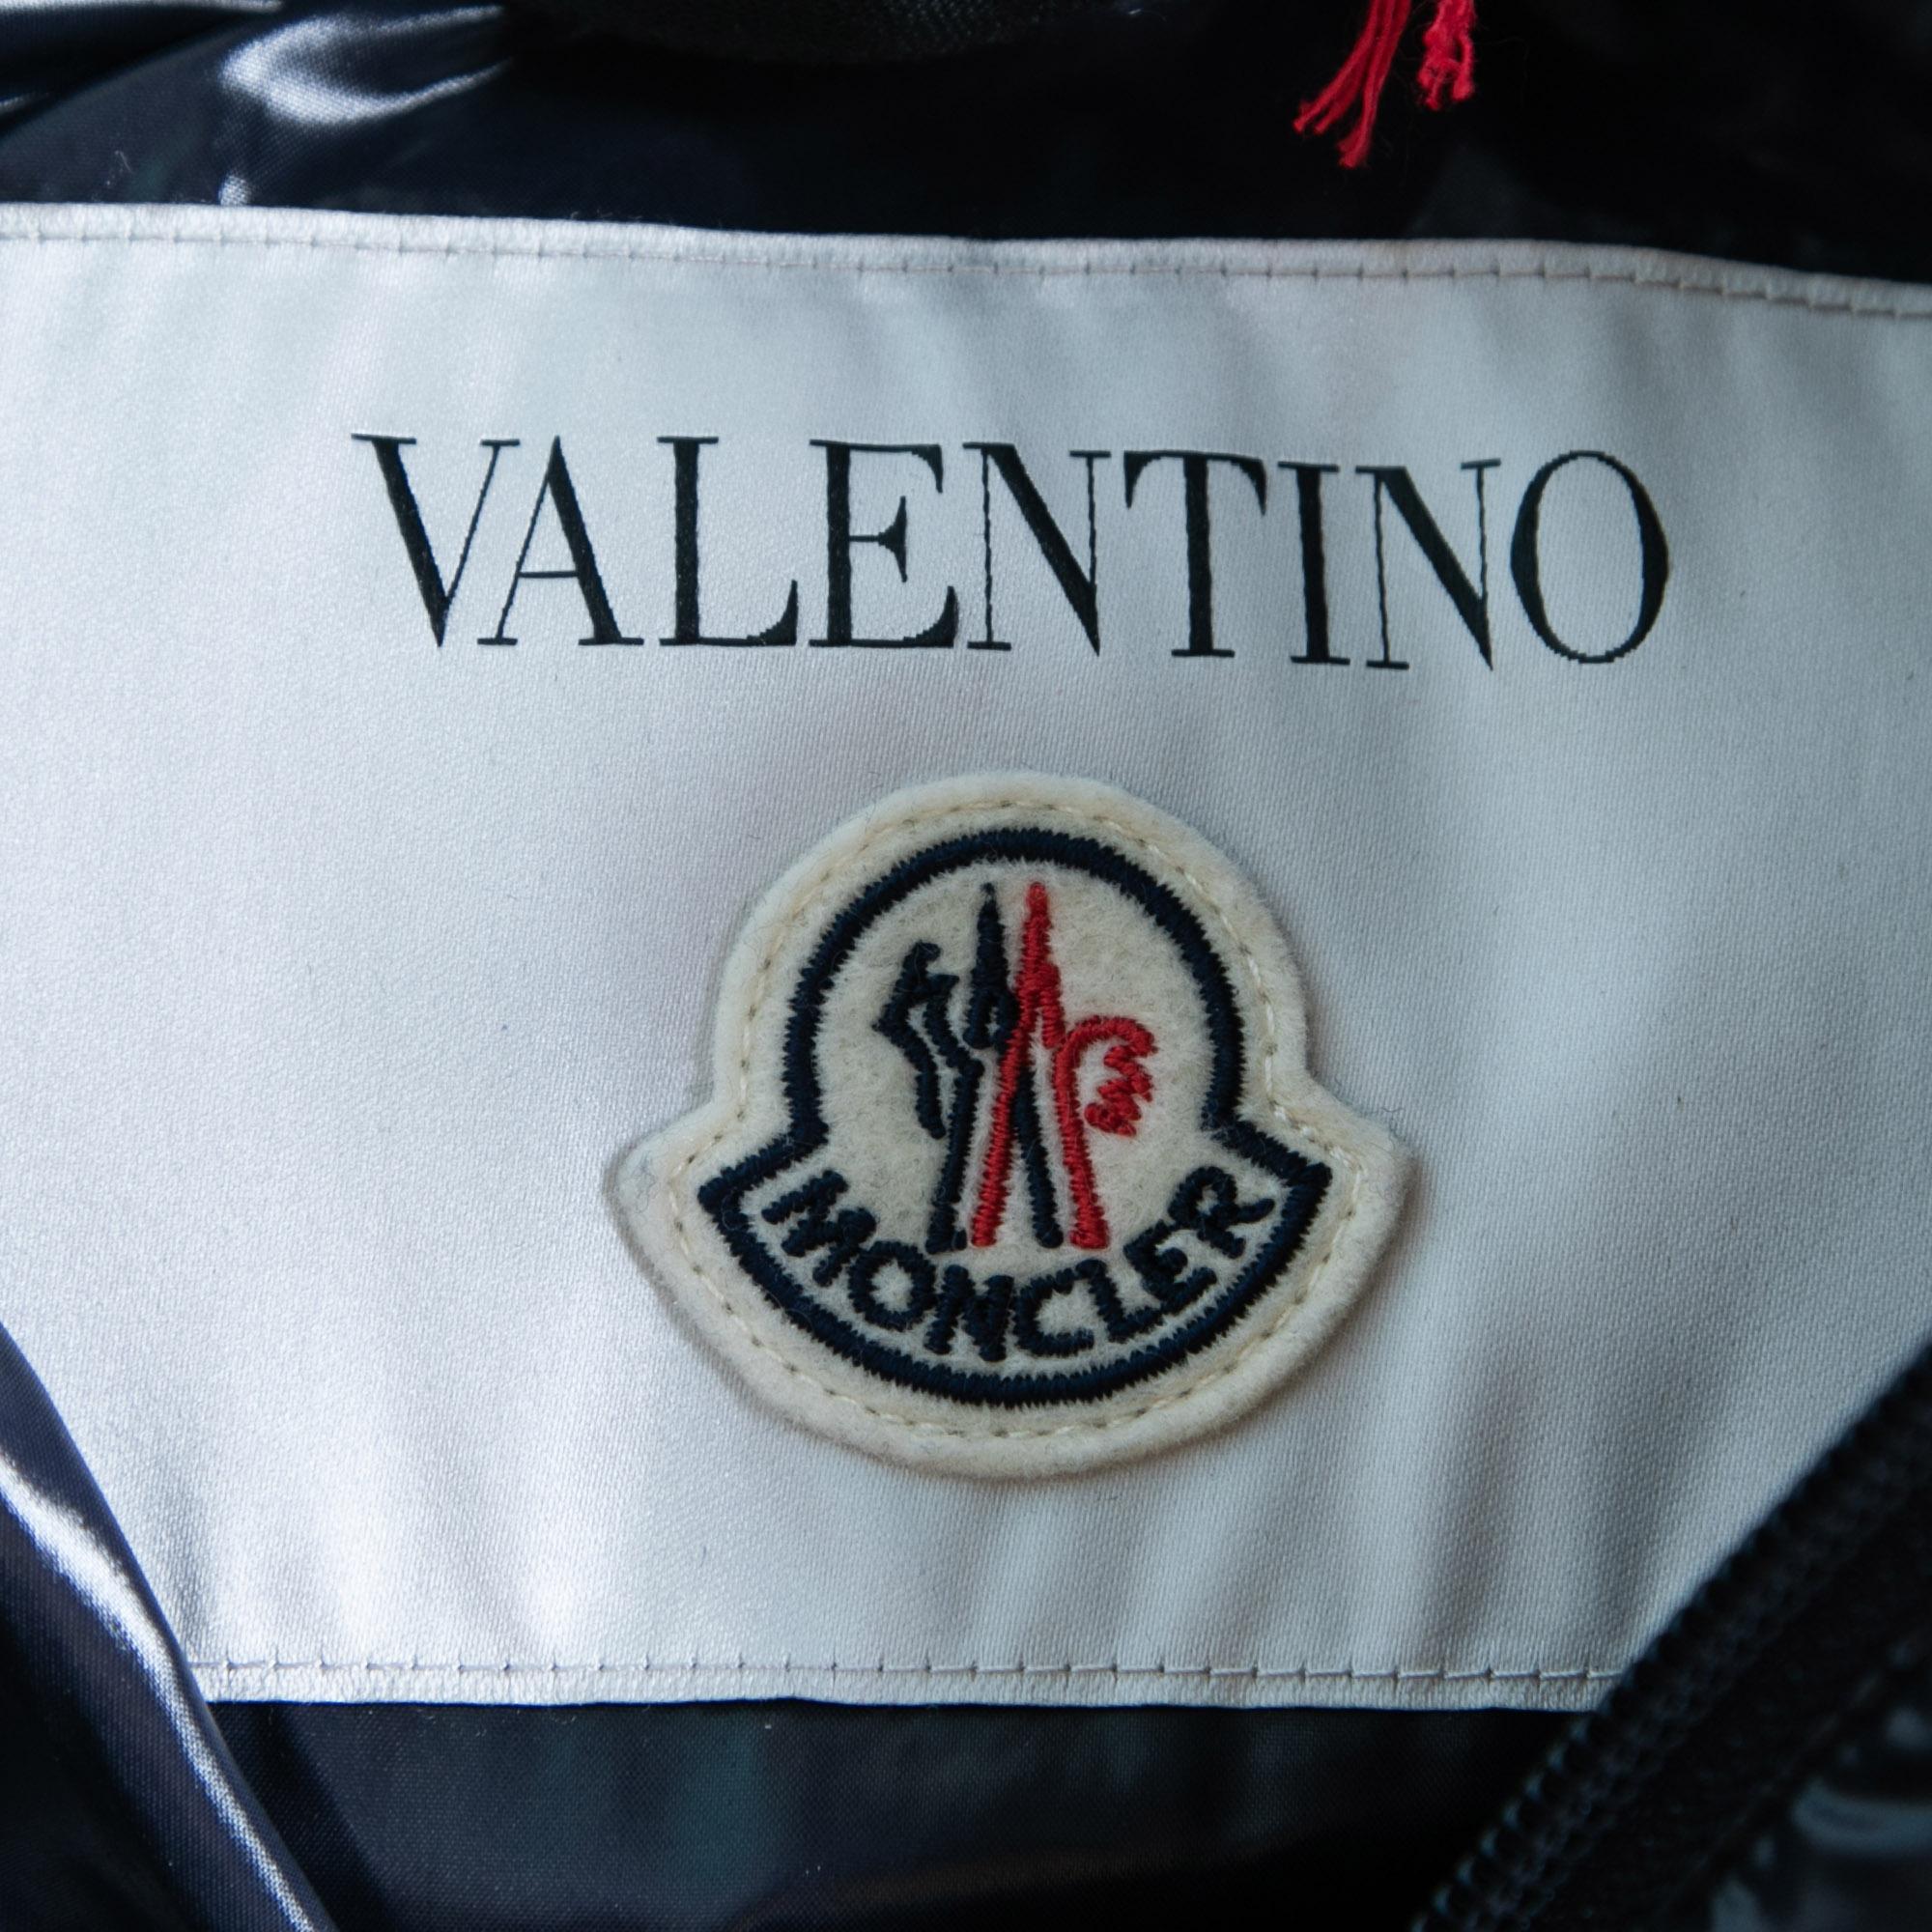 Planning a trip to the Alps? Well, don't forget to carry this Valentino jacket with you! Endowed with heavy padding, this jacket is crafted meticulously using navy-blue synthetic fabric, with a signature VLogo print highlighting the front. It equips